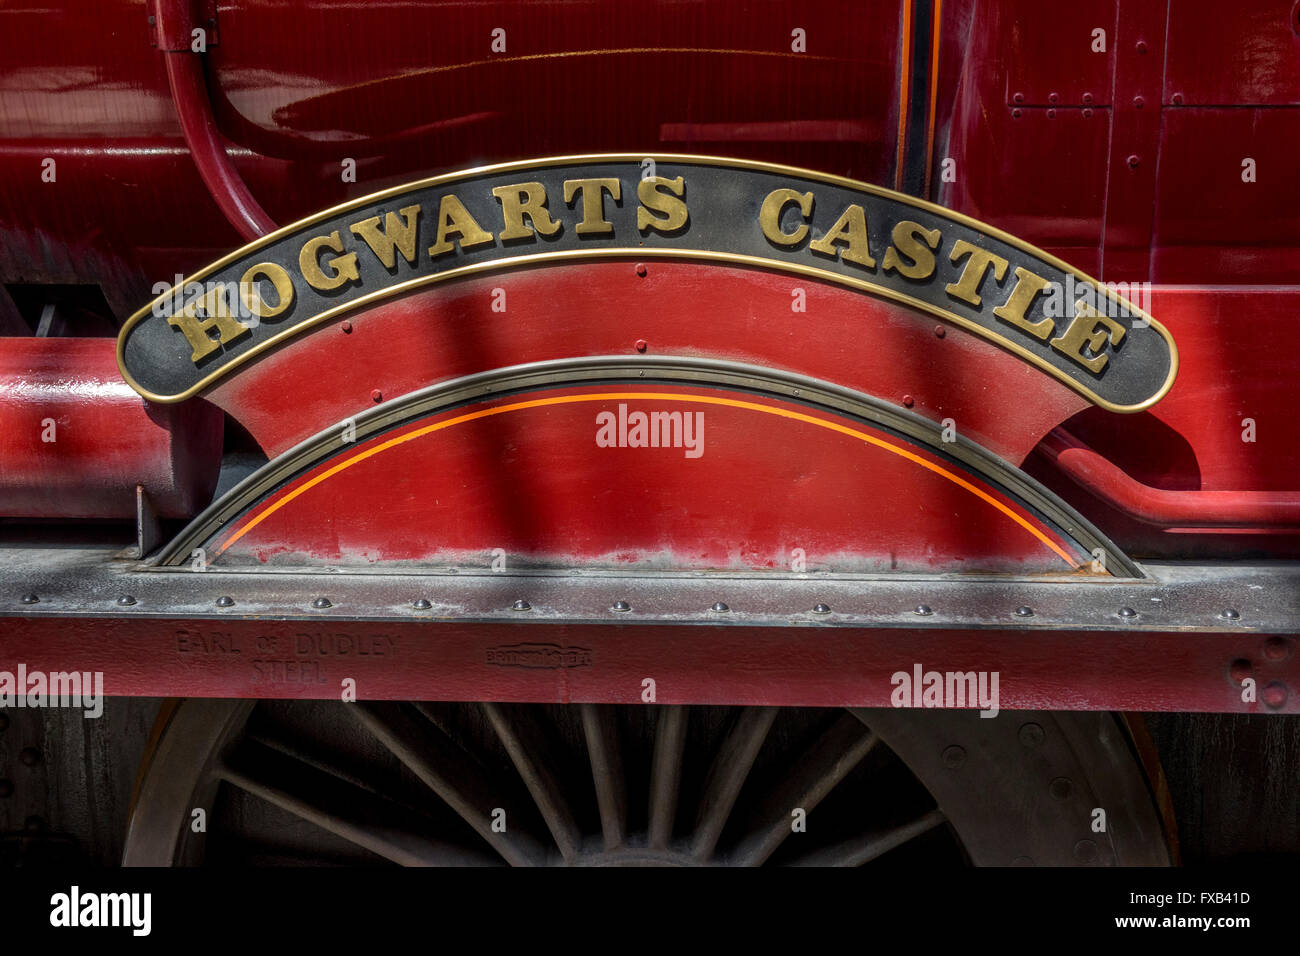 Close Up Of The Name Plate Of The Hogwarts Castle Express Steam Train Universal Studios The Wizarding World Of Harry Potter Stock Photo